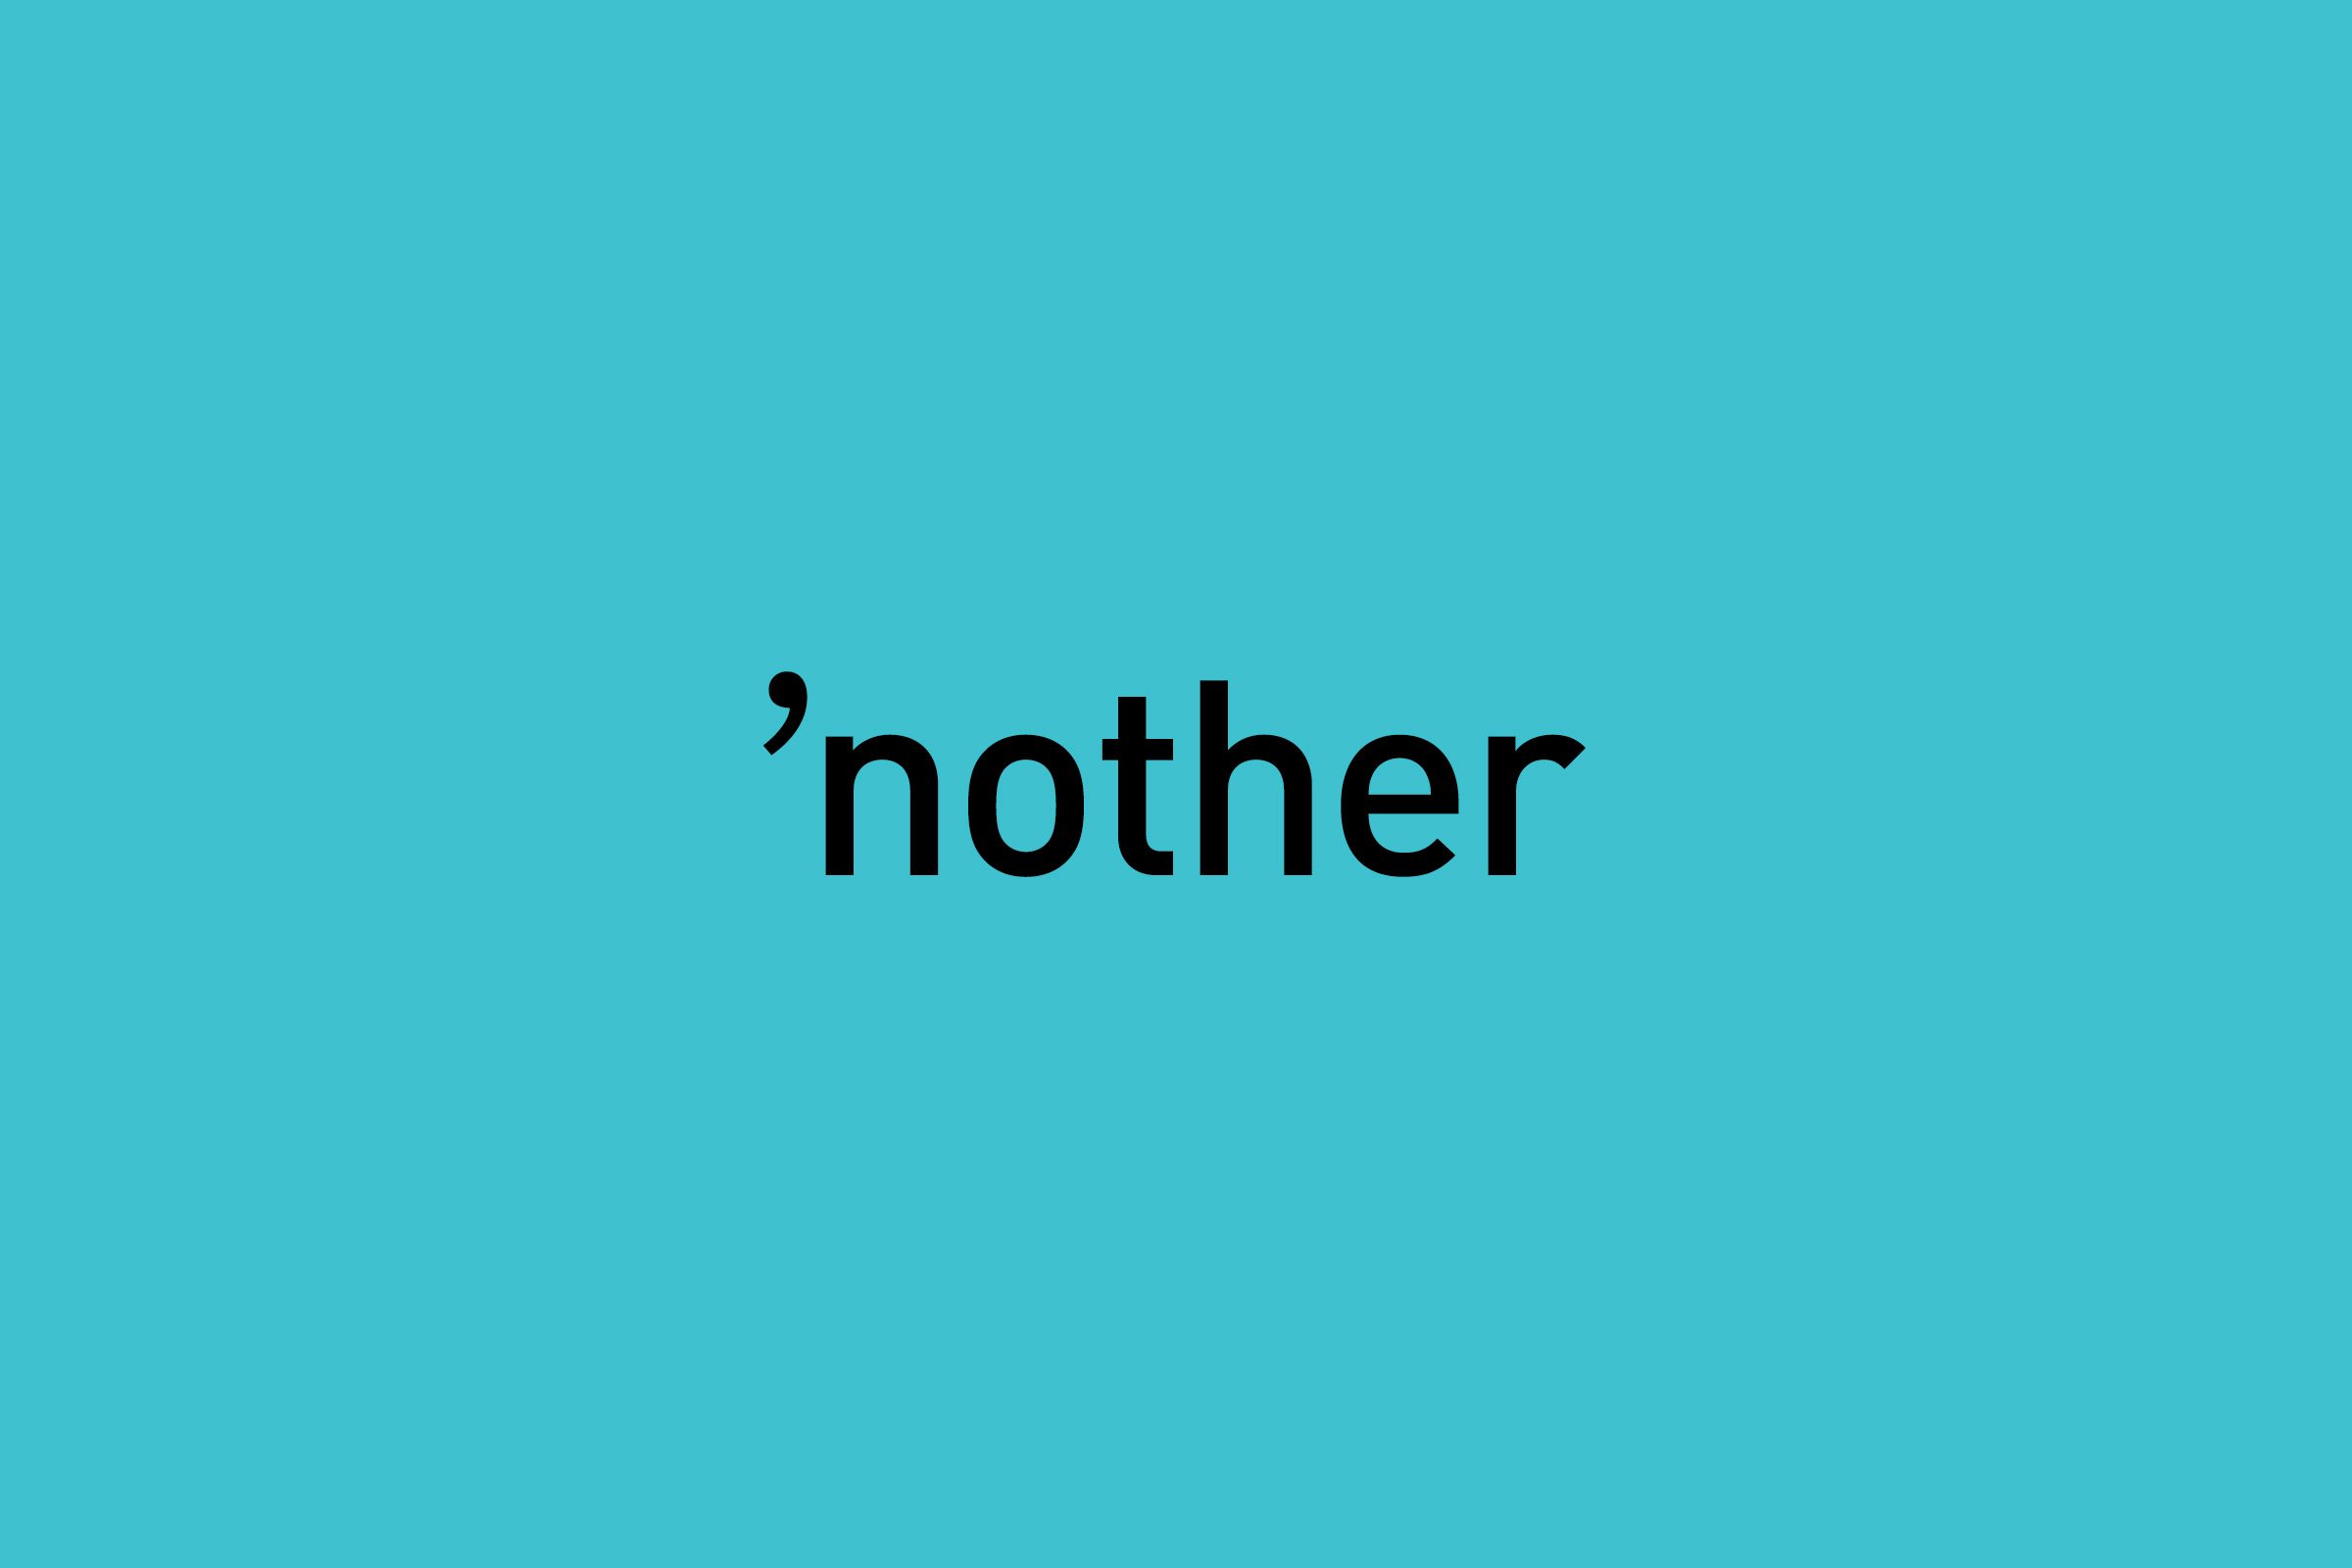 text: 'nother